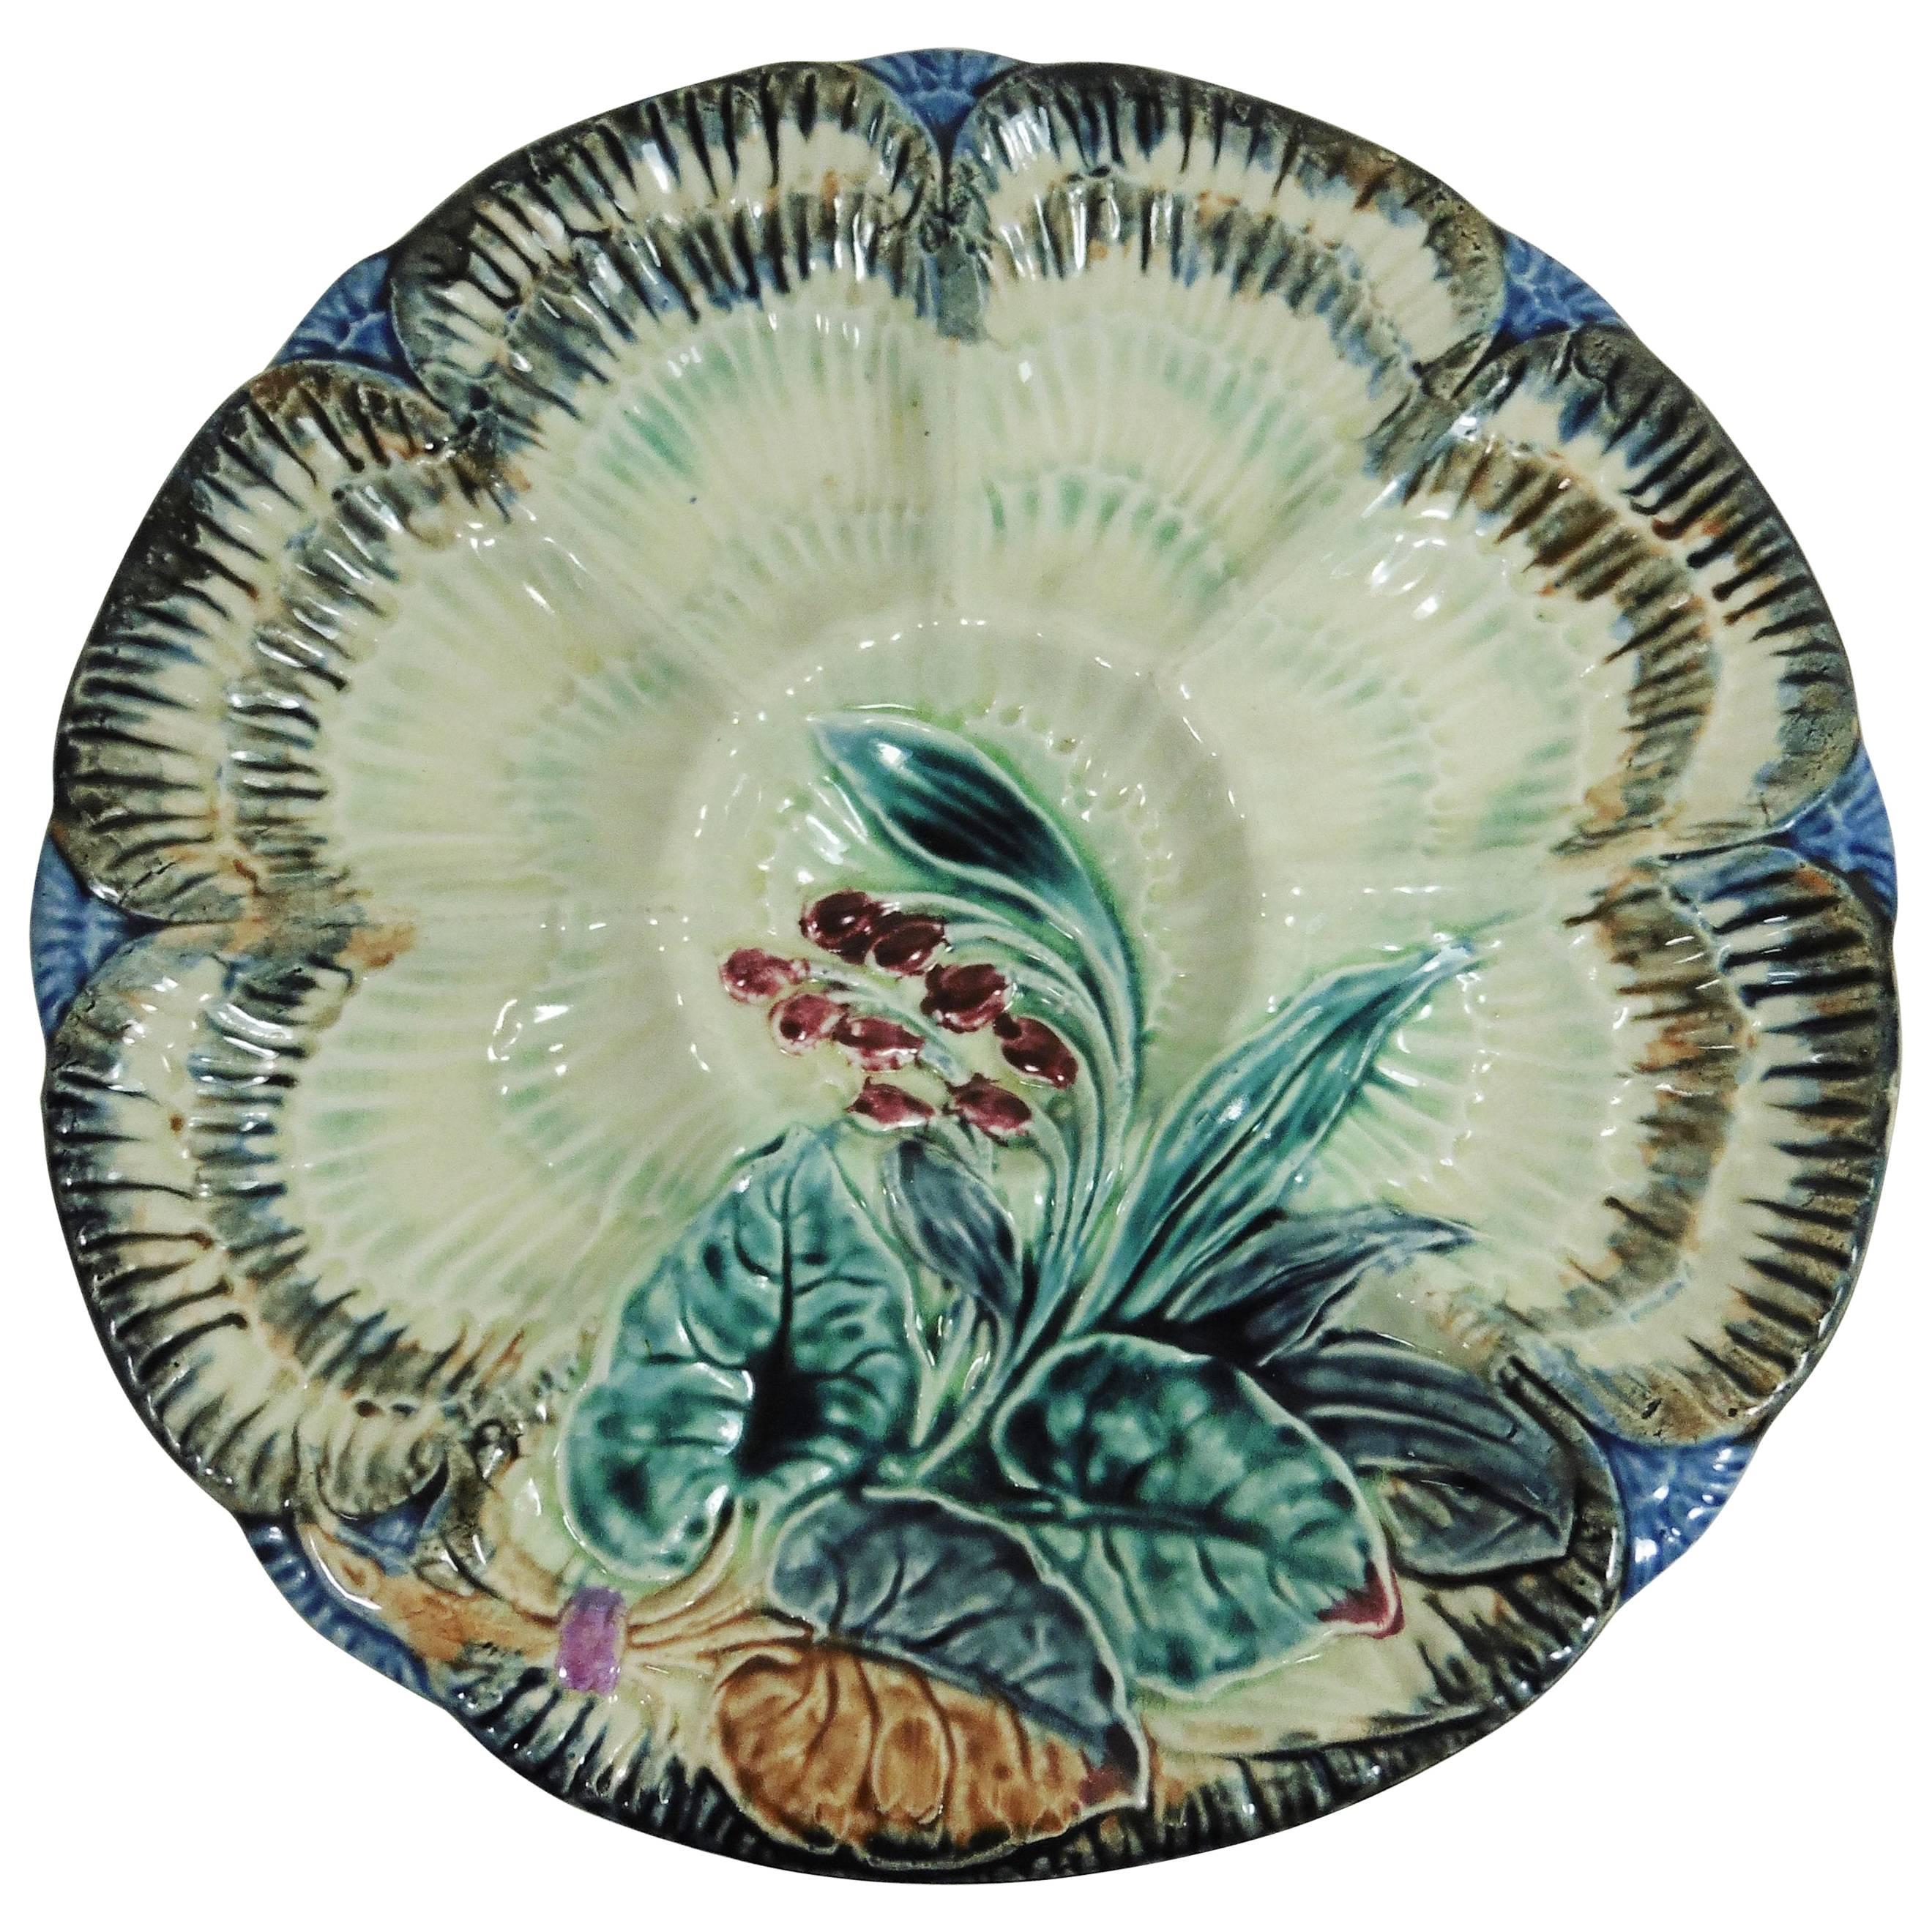 19th Century Belgium Majolica Flowers Oyster Plate, Wasmuel